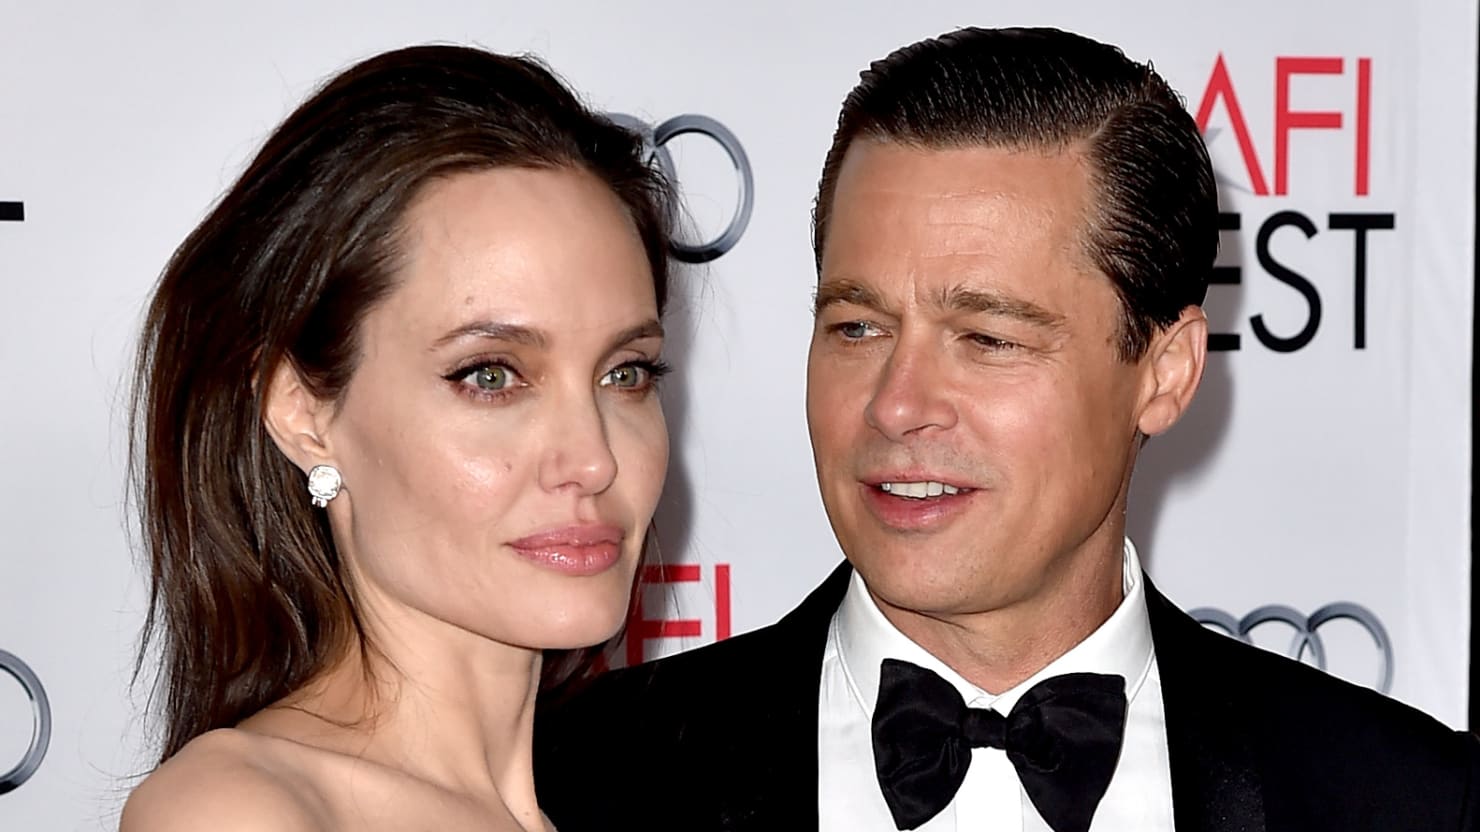 Angelina Jolie accuses Brad Pitt of domestic violence in new divorce court documents